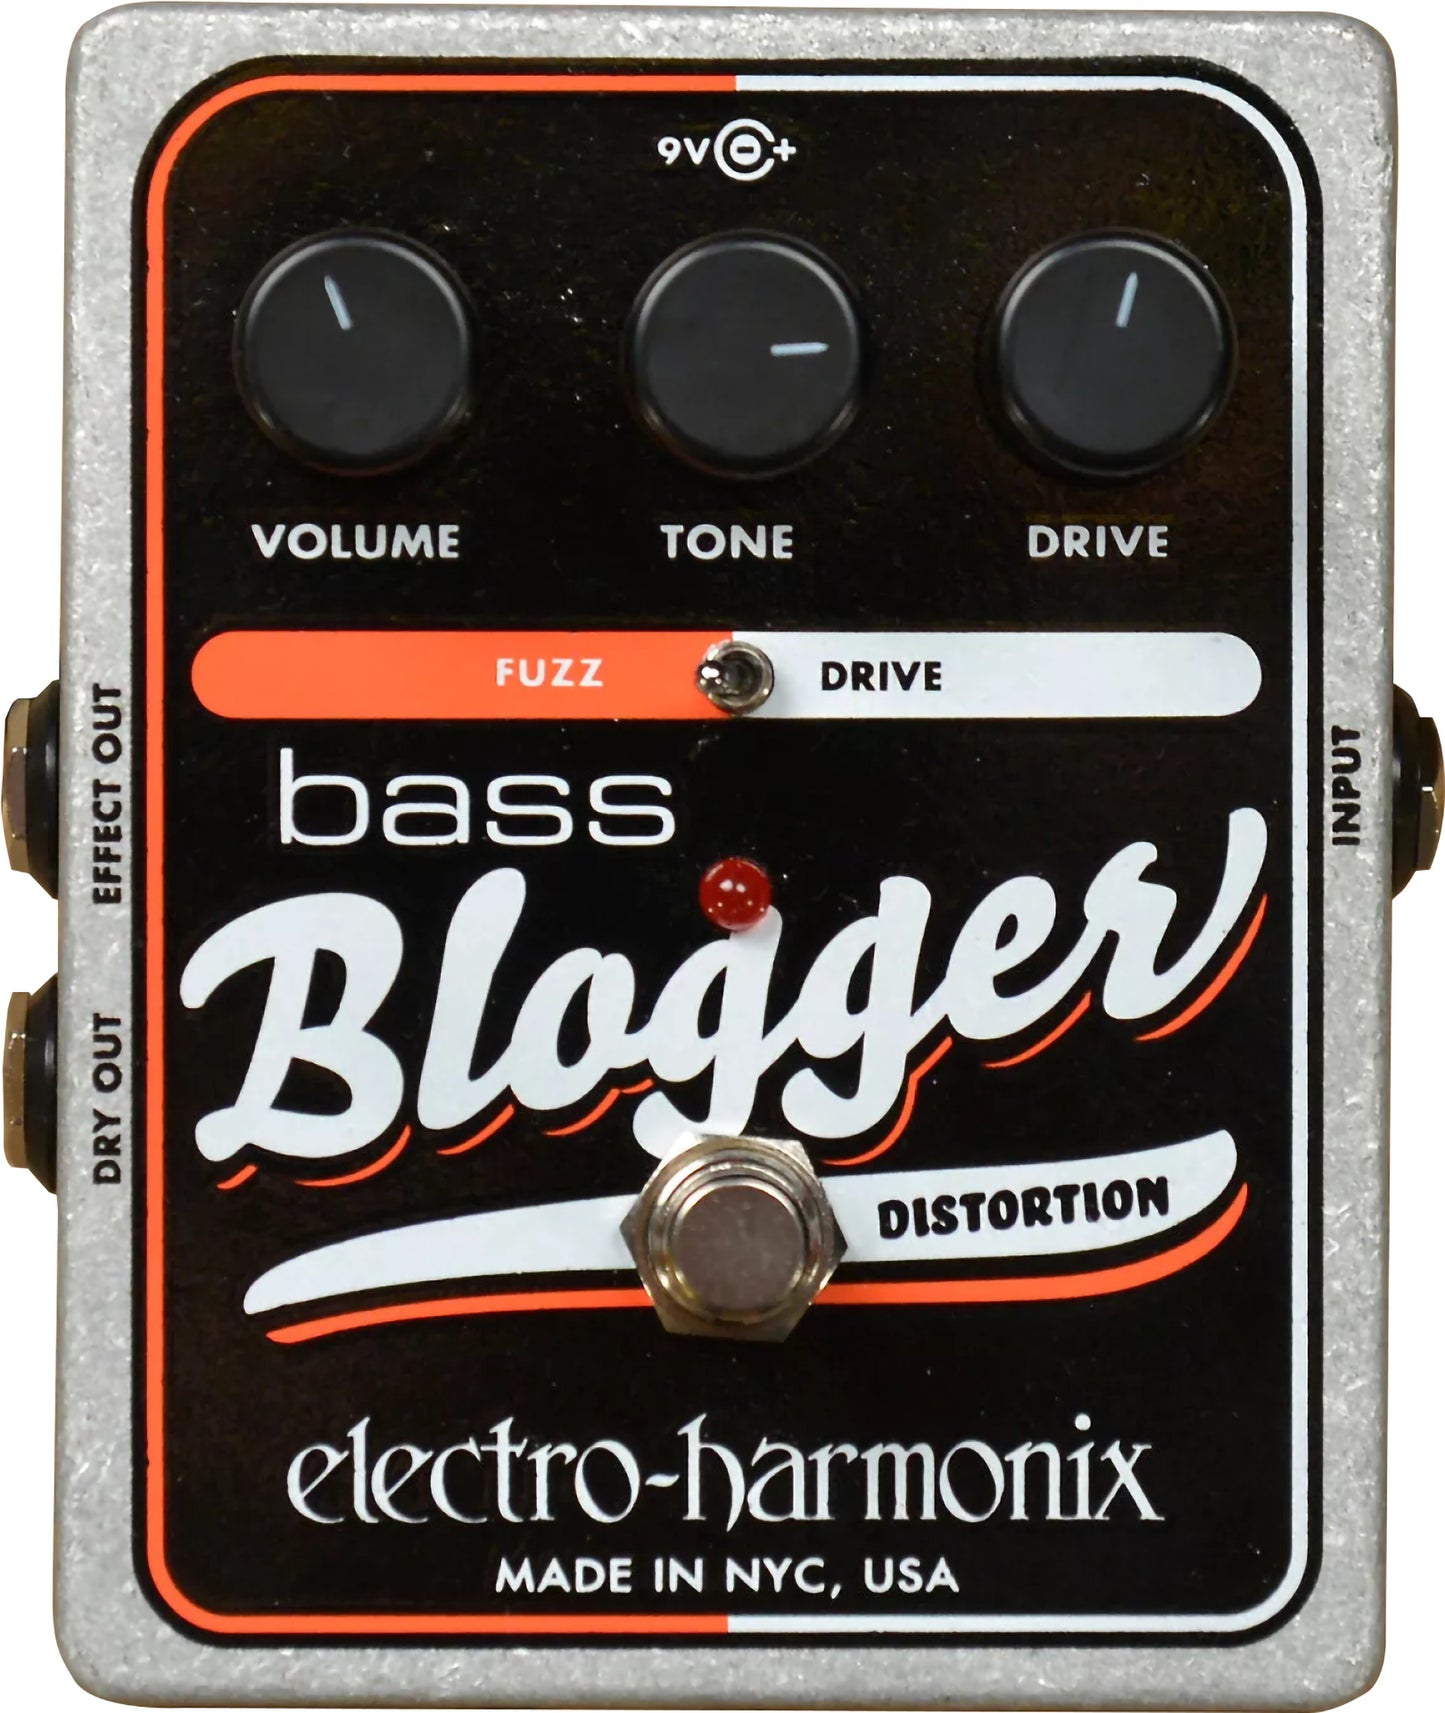 Electro Harmonix Bass Blogger Distortion Effects Pedal